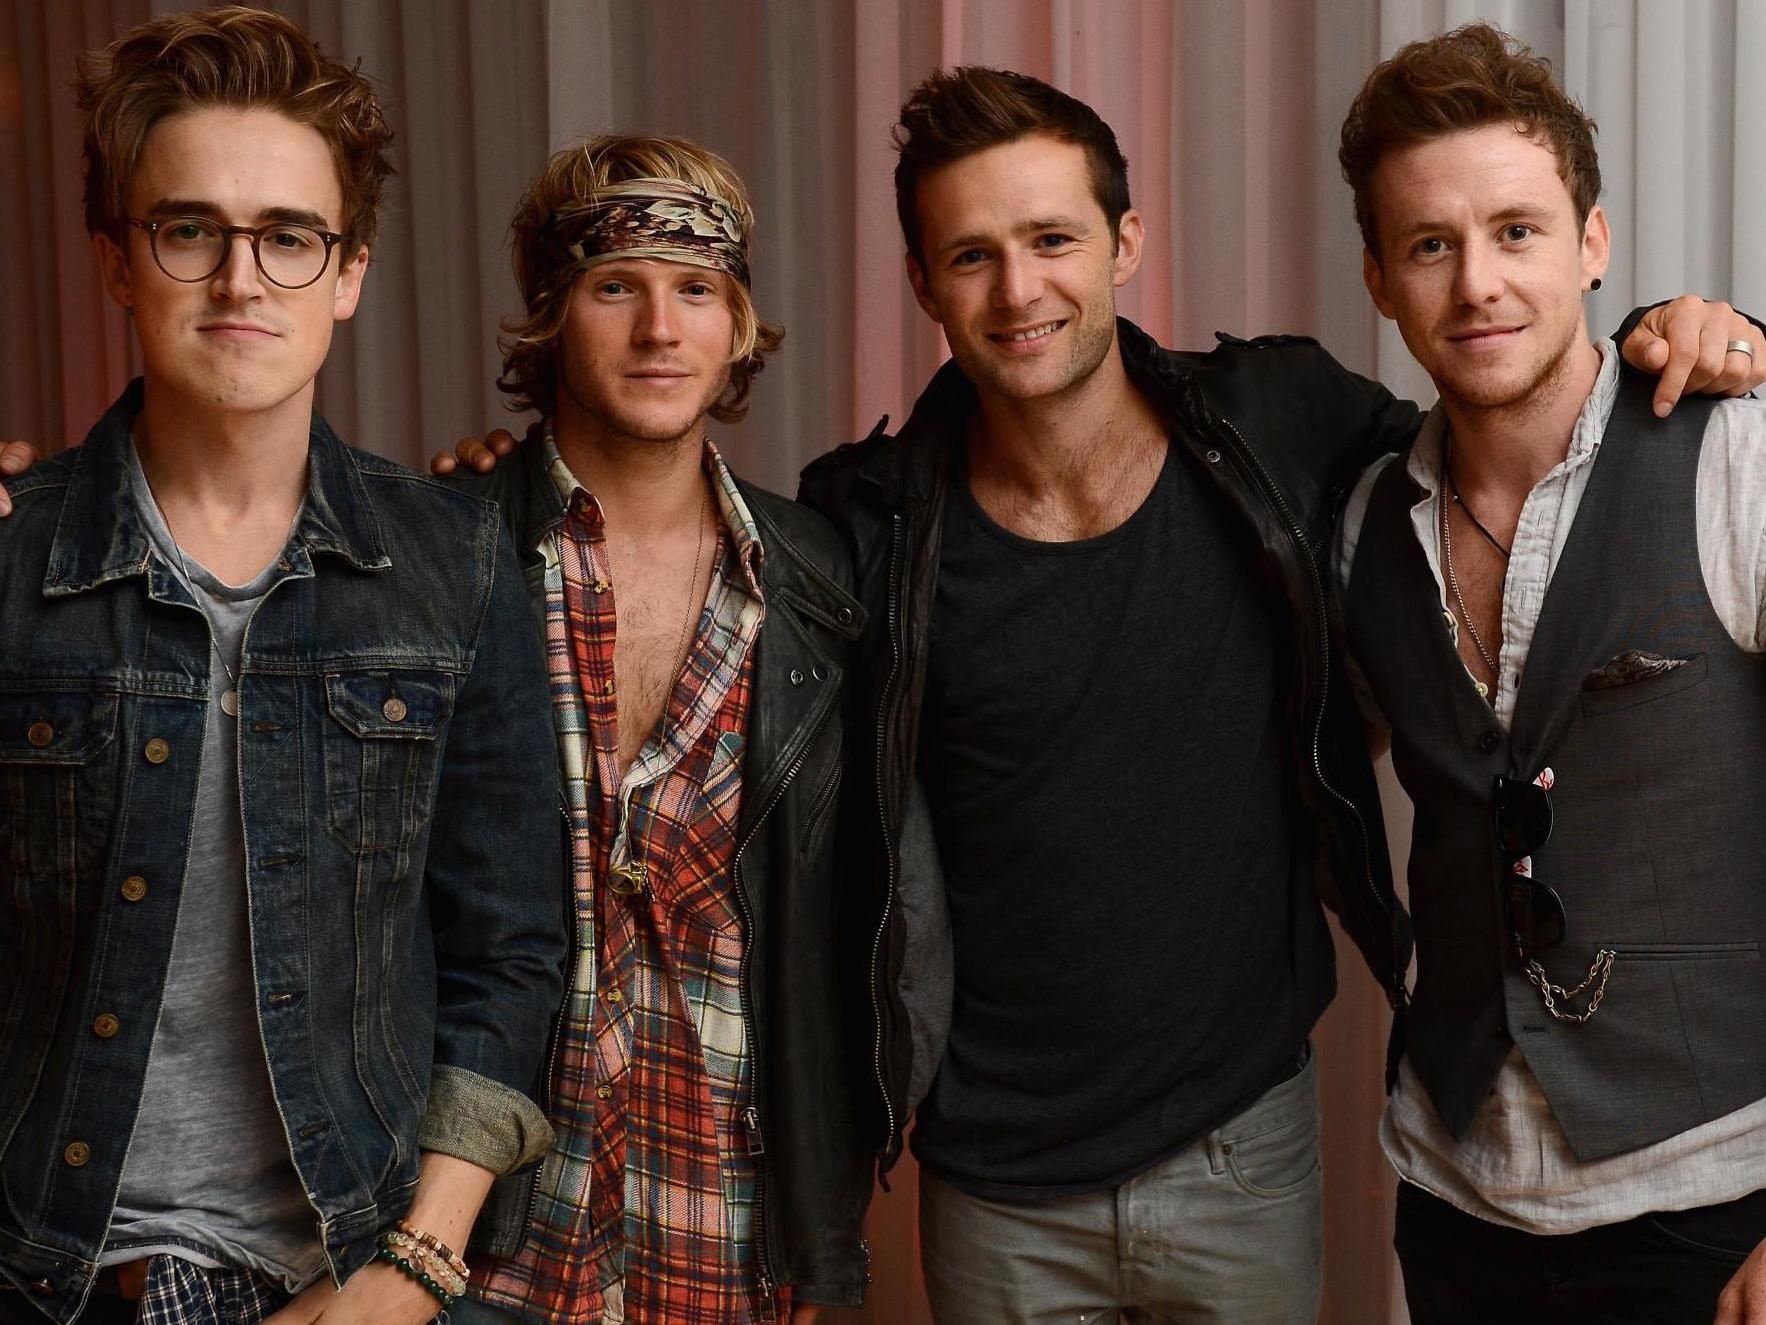 Mcfly Excite Fans With Cryptic Video On Twitter The Independent